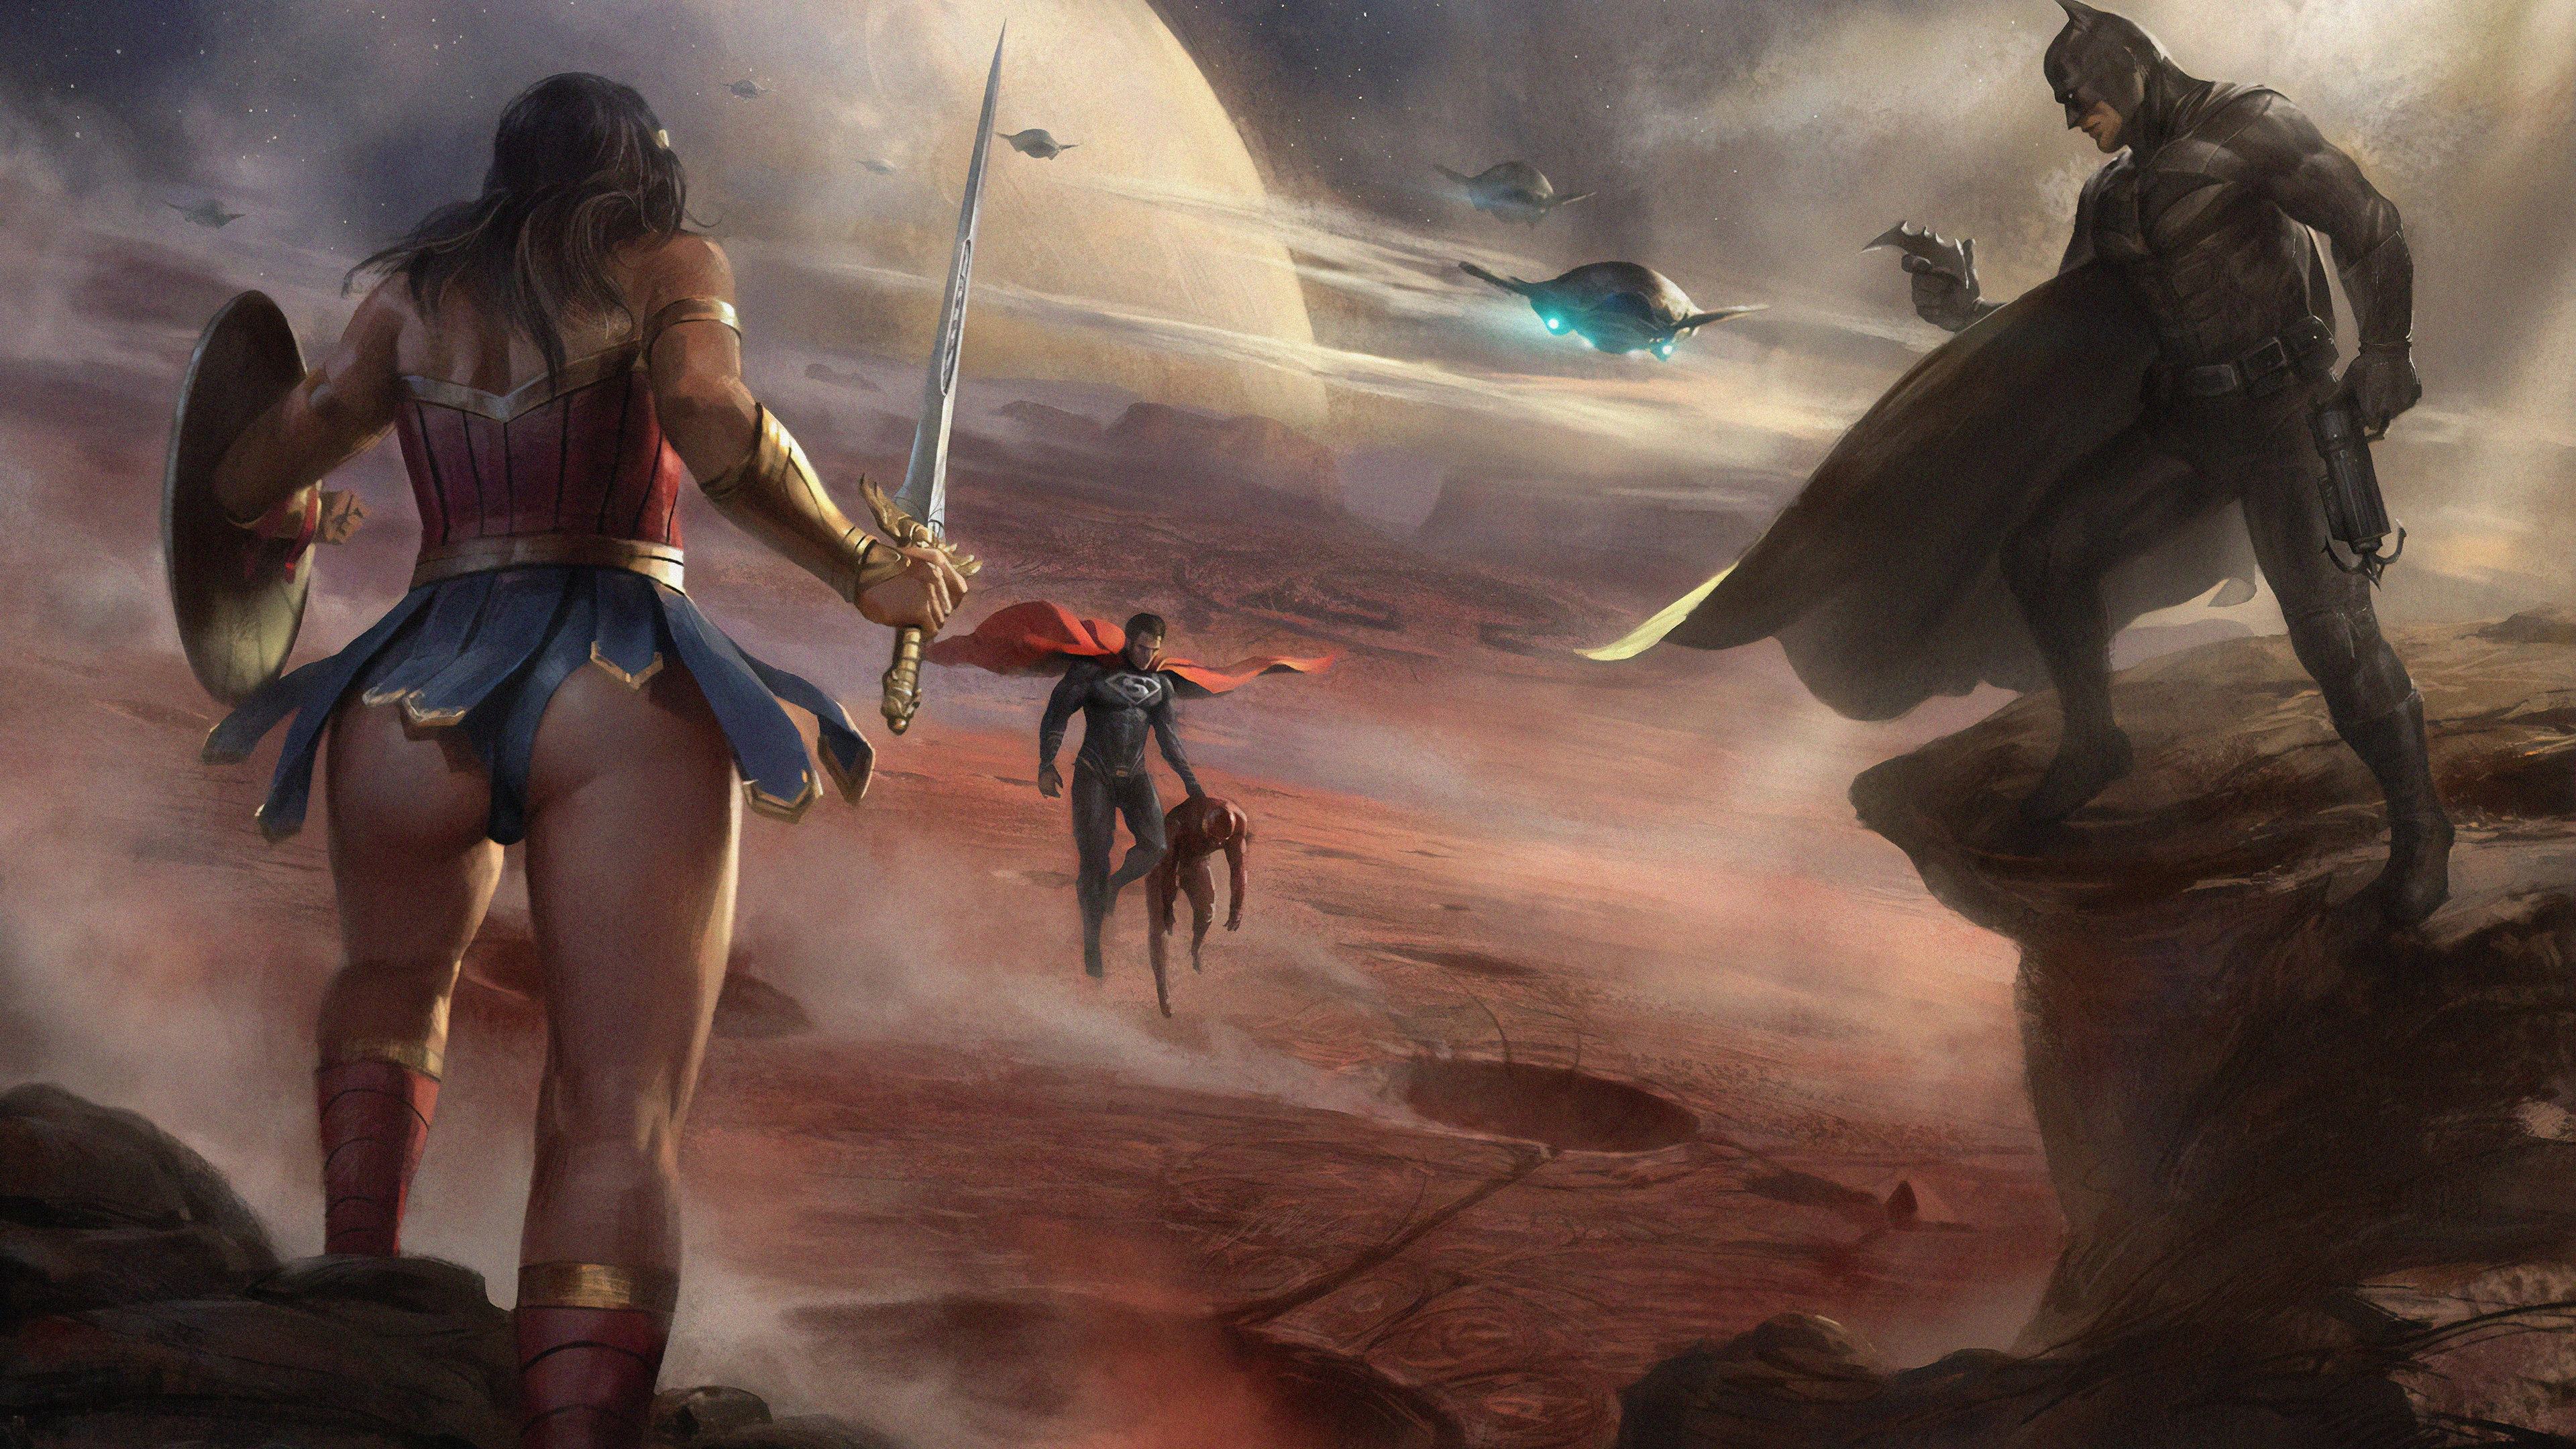 diana and bruce saving flash from superman 1563219808 - Diana And Bruce Saving Flash From Superman - wonder woman wallpapers, superman wallpapers, superheroes wallpapers, hd-wallpapers, digital art wallpapers, batman wallpapers, 4k-wallpapers